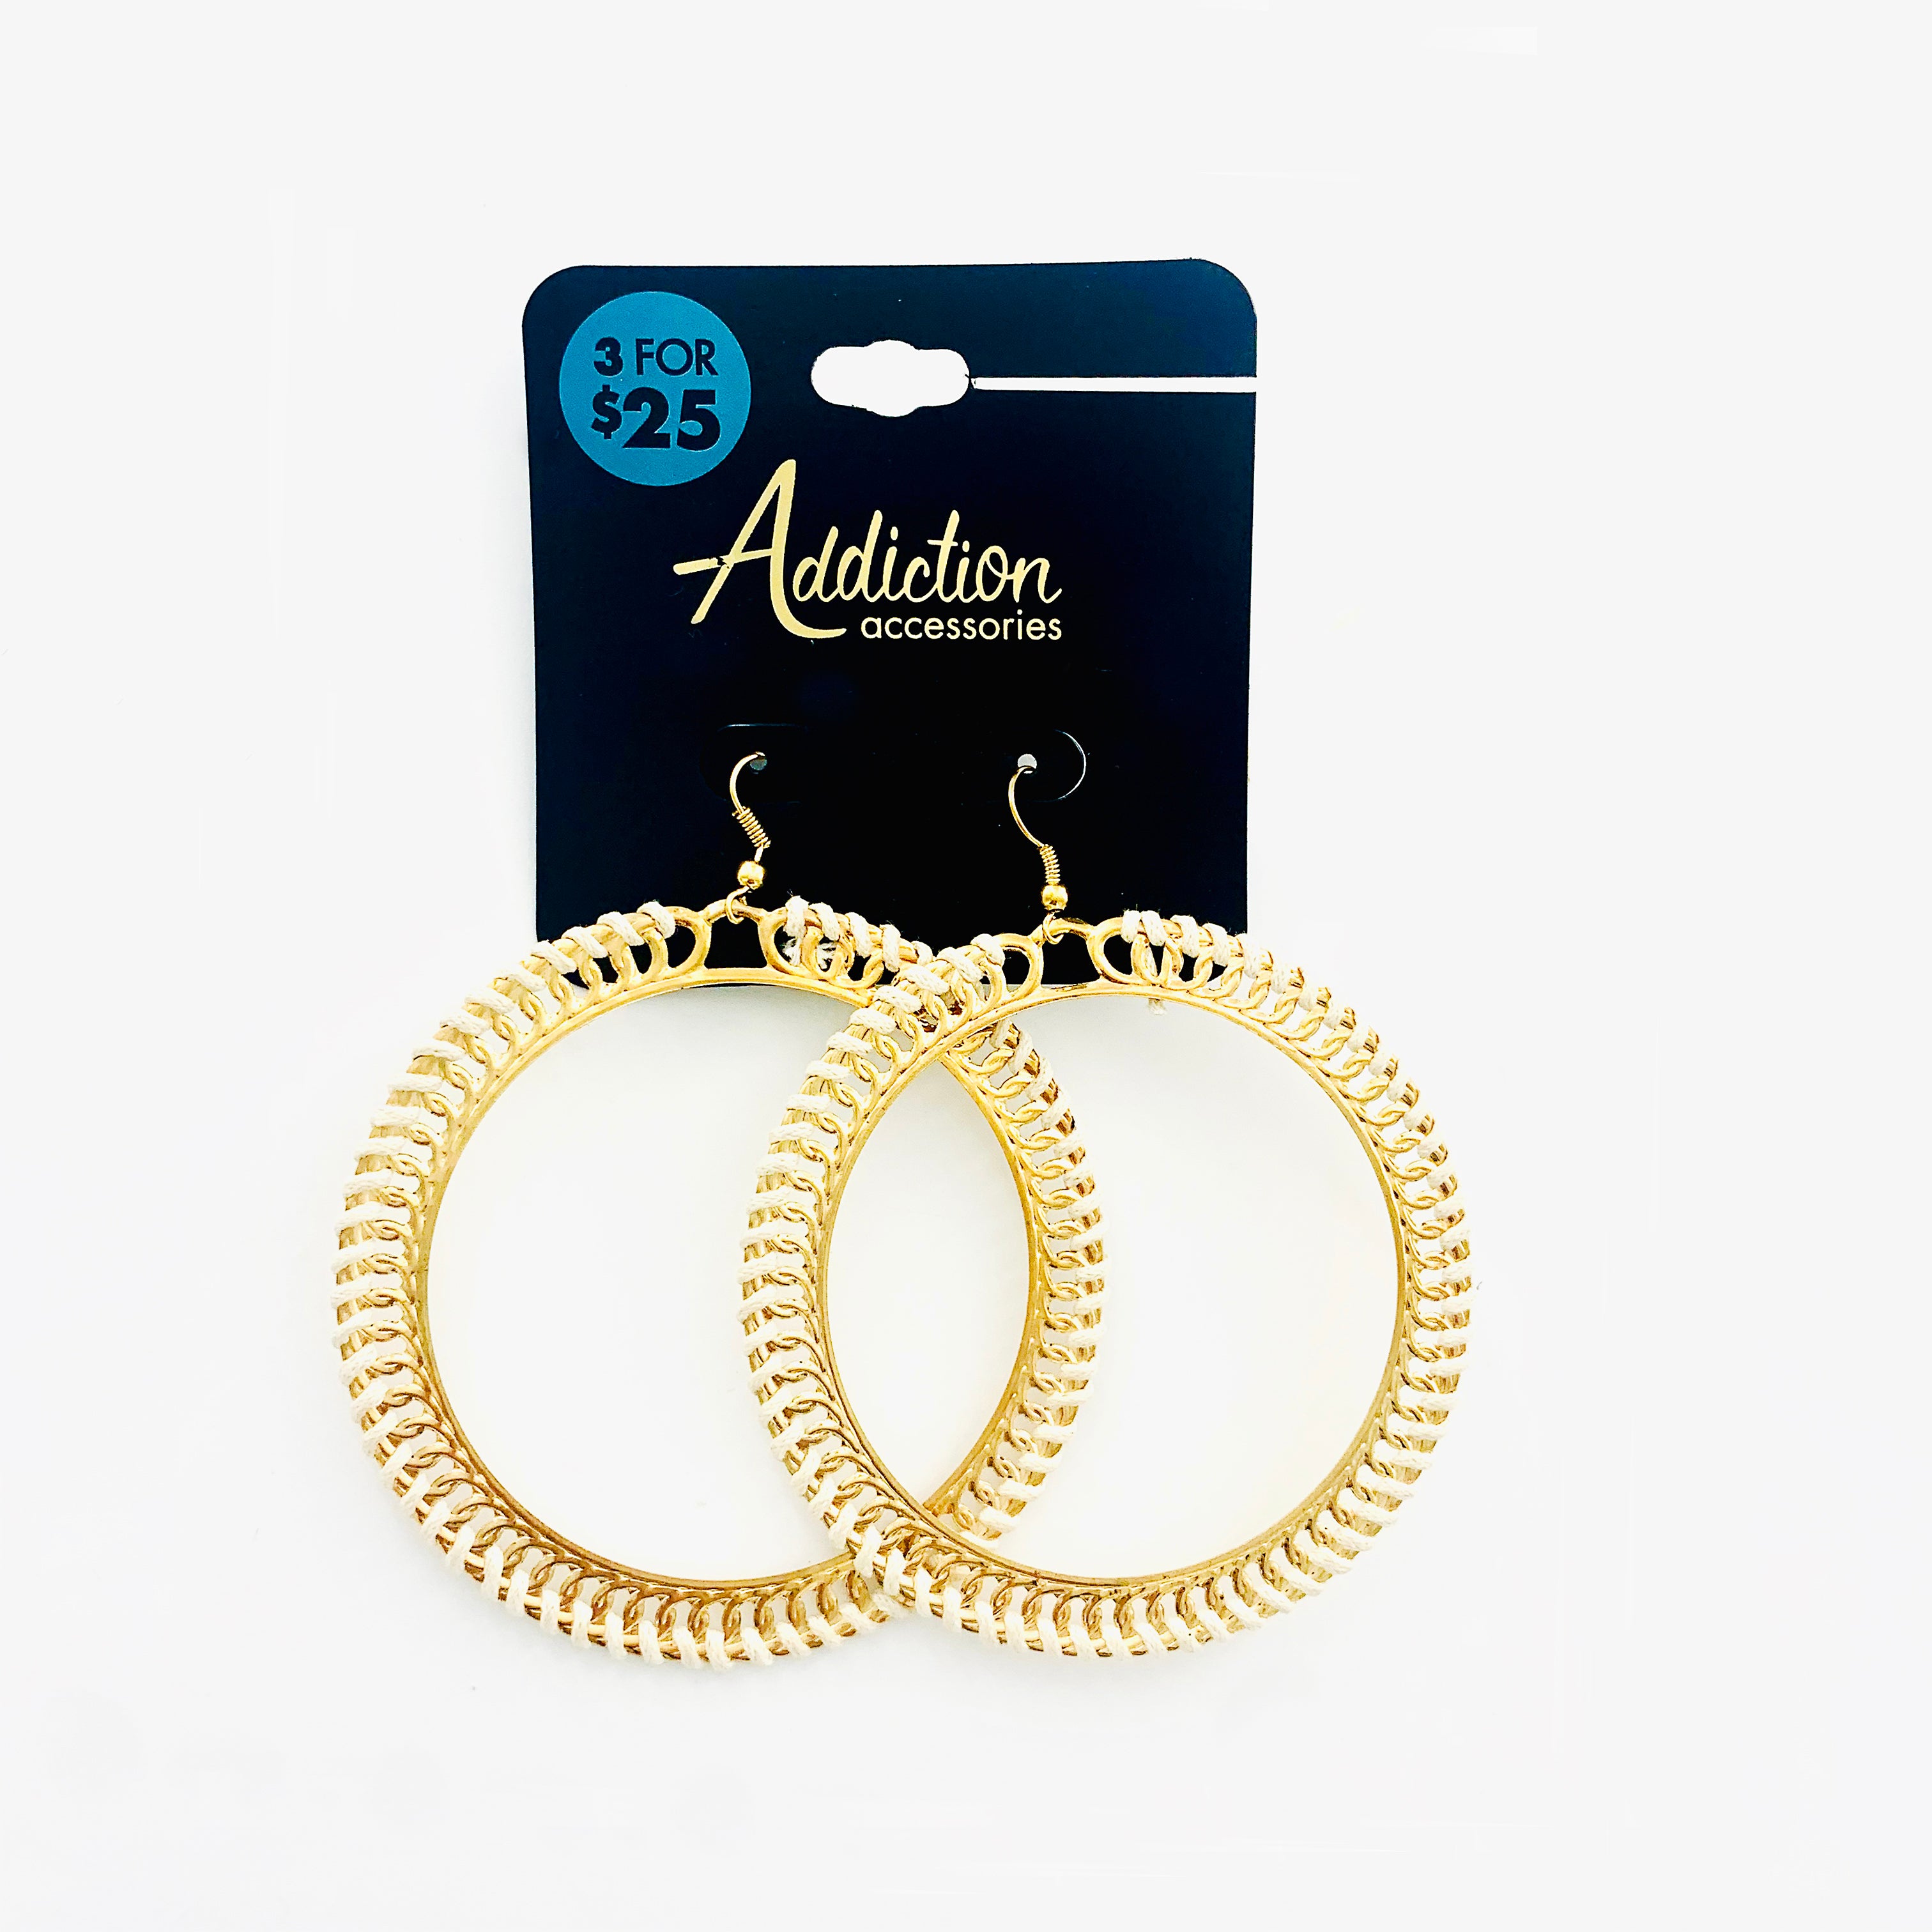 Large gold hoops with white leather rope